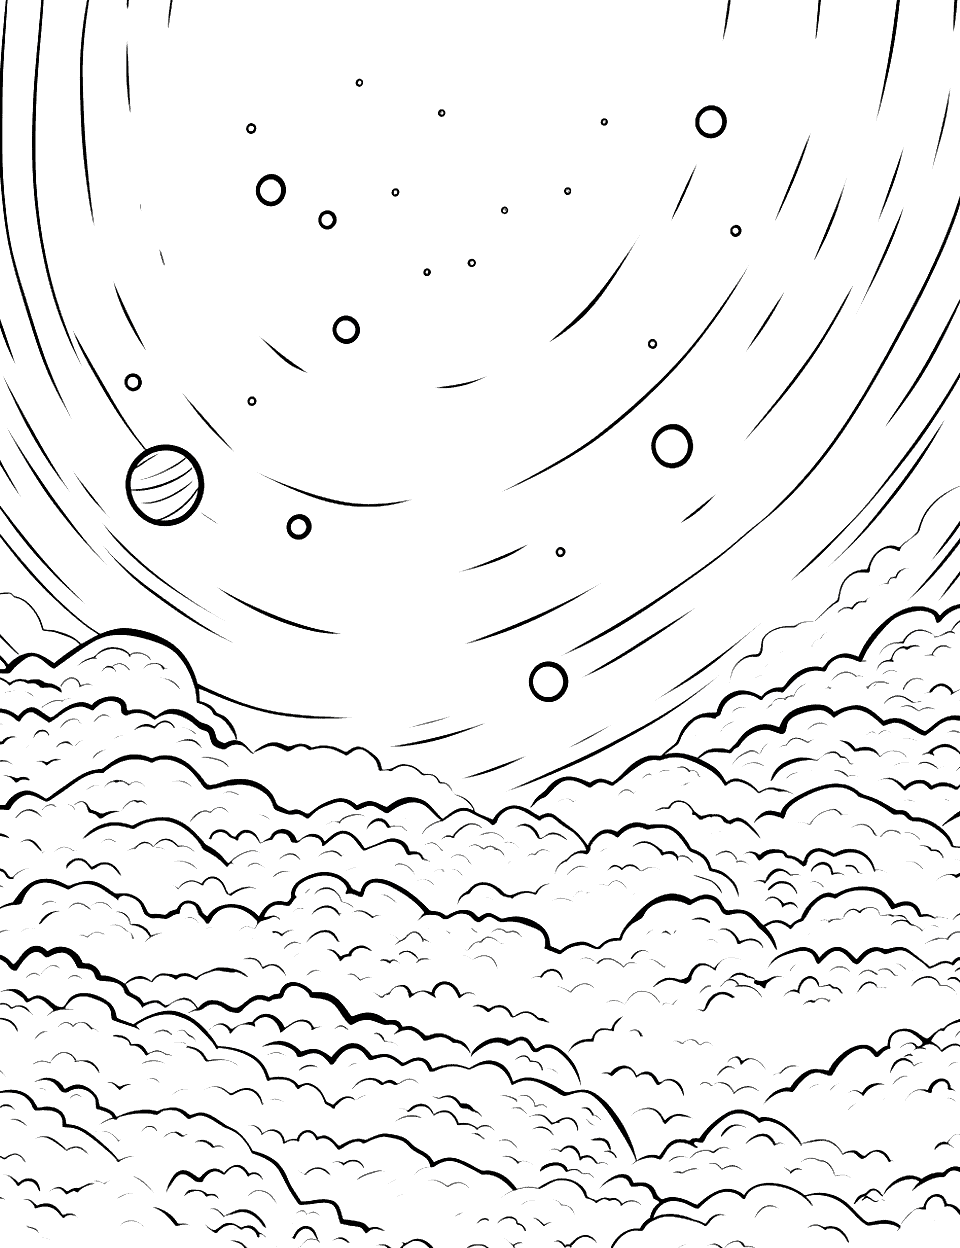 Aurora Borealis from Space Solar System Coloring Page - The Aurora Borealis seen from a space perspective.